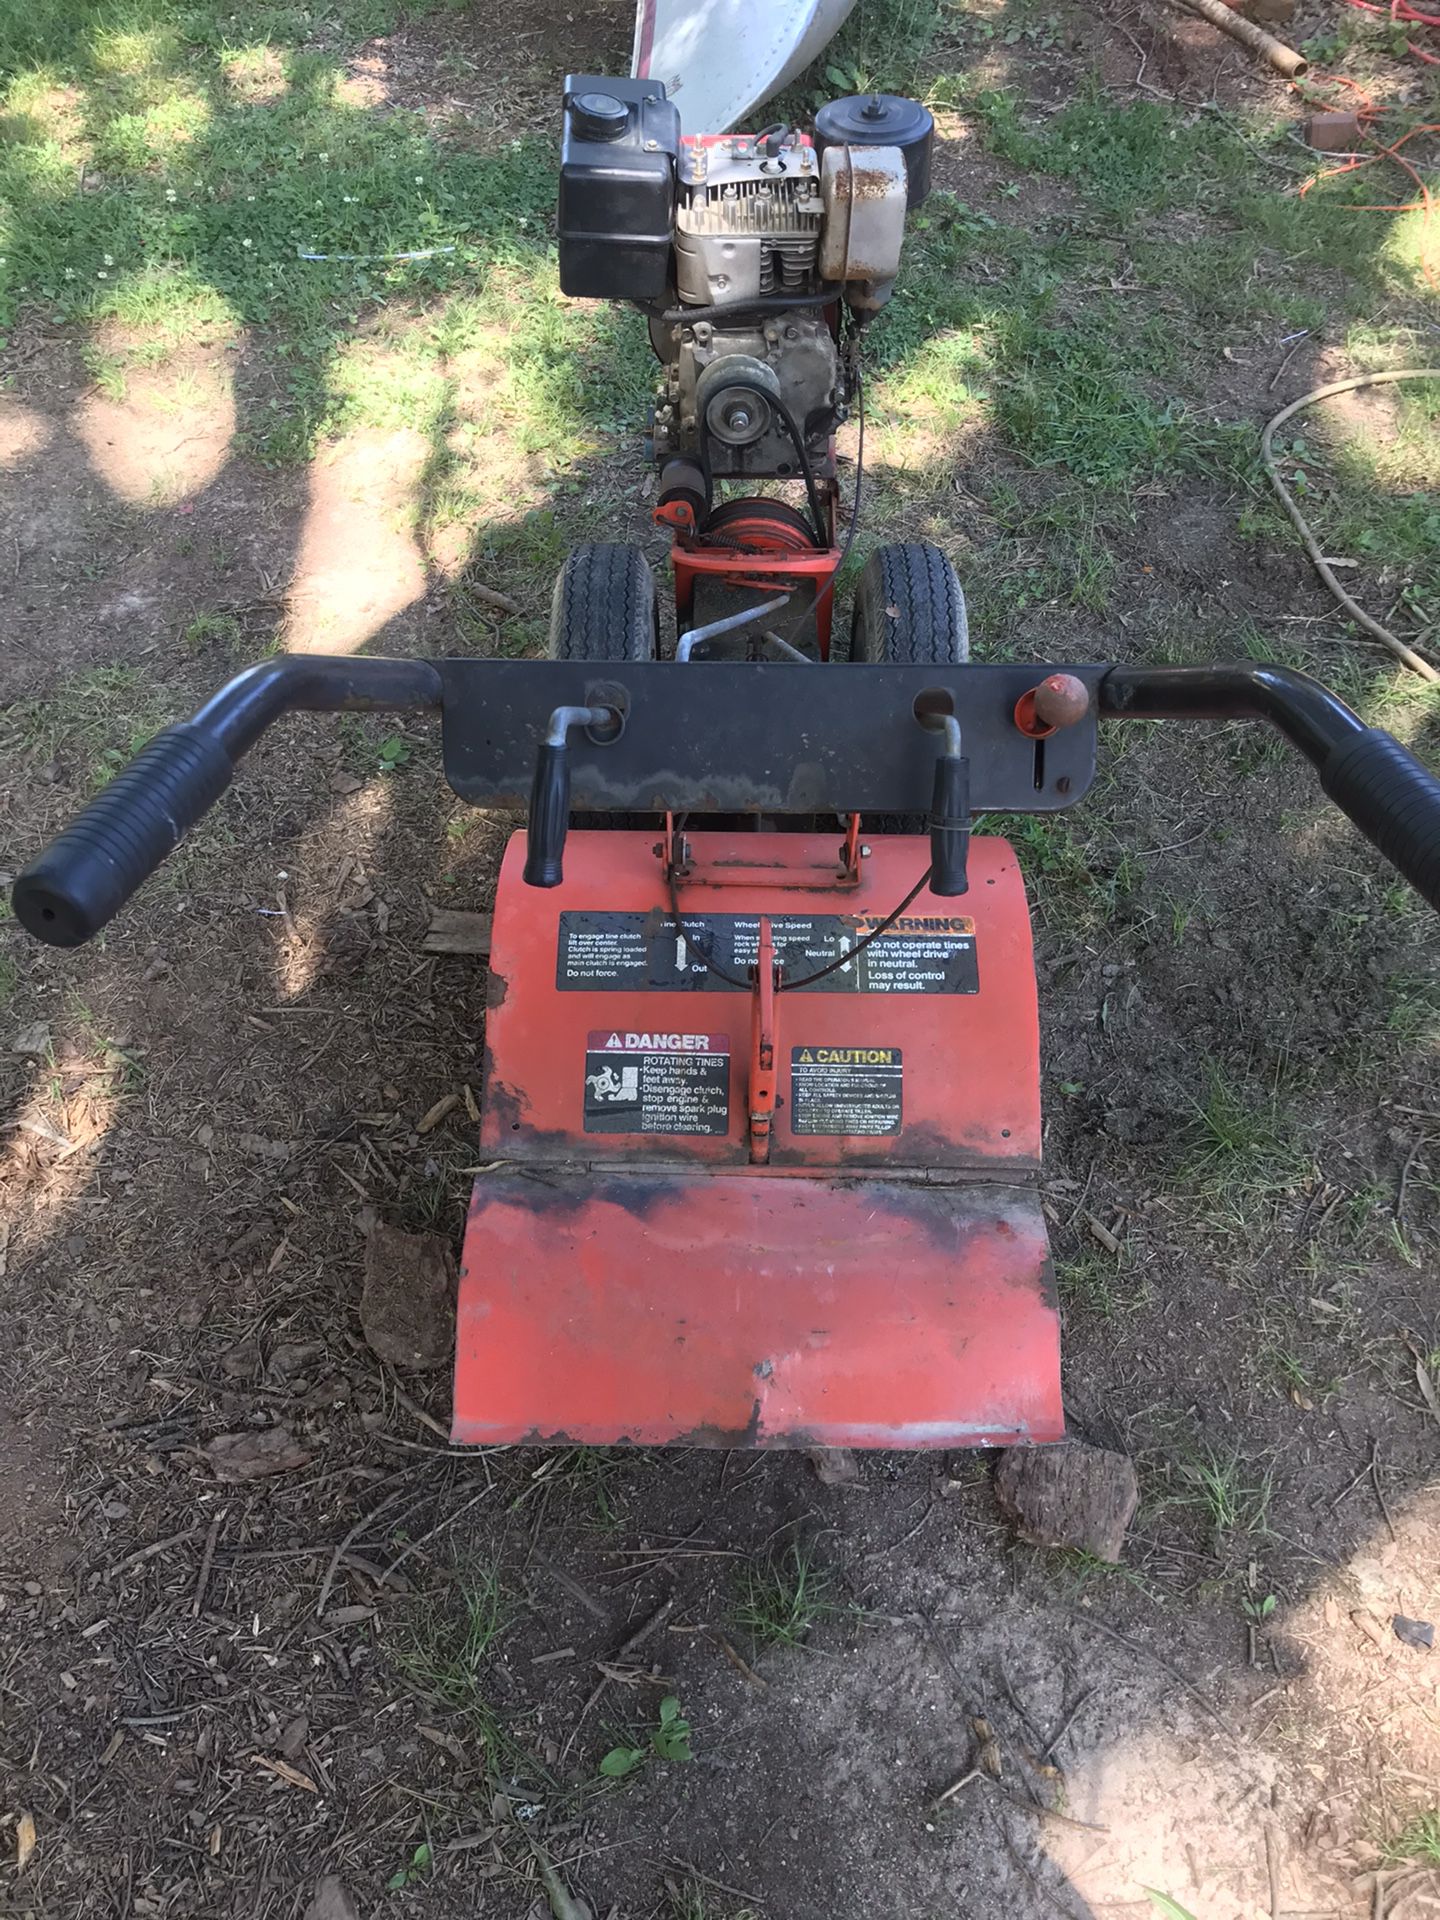 Ariens Rear Tine Tiller For Sale In Wake Forest Nc Offerup